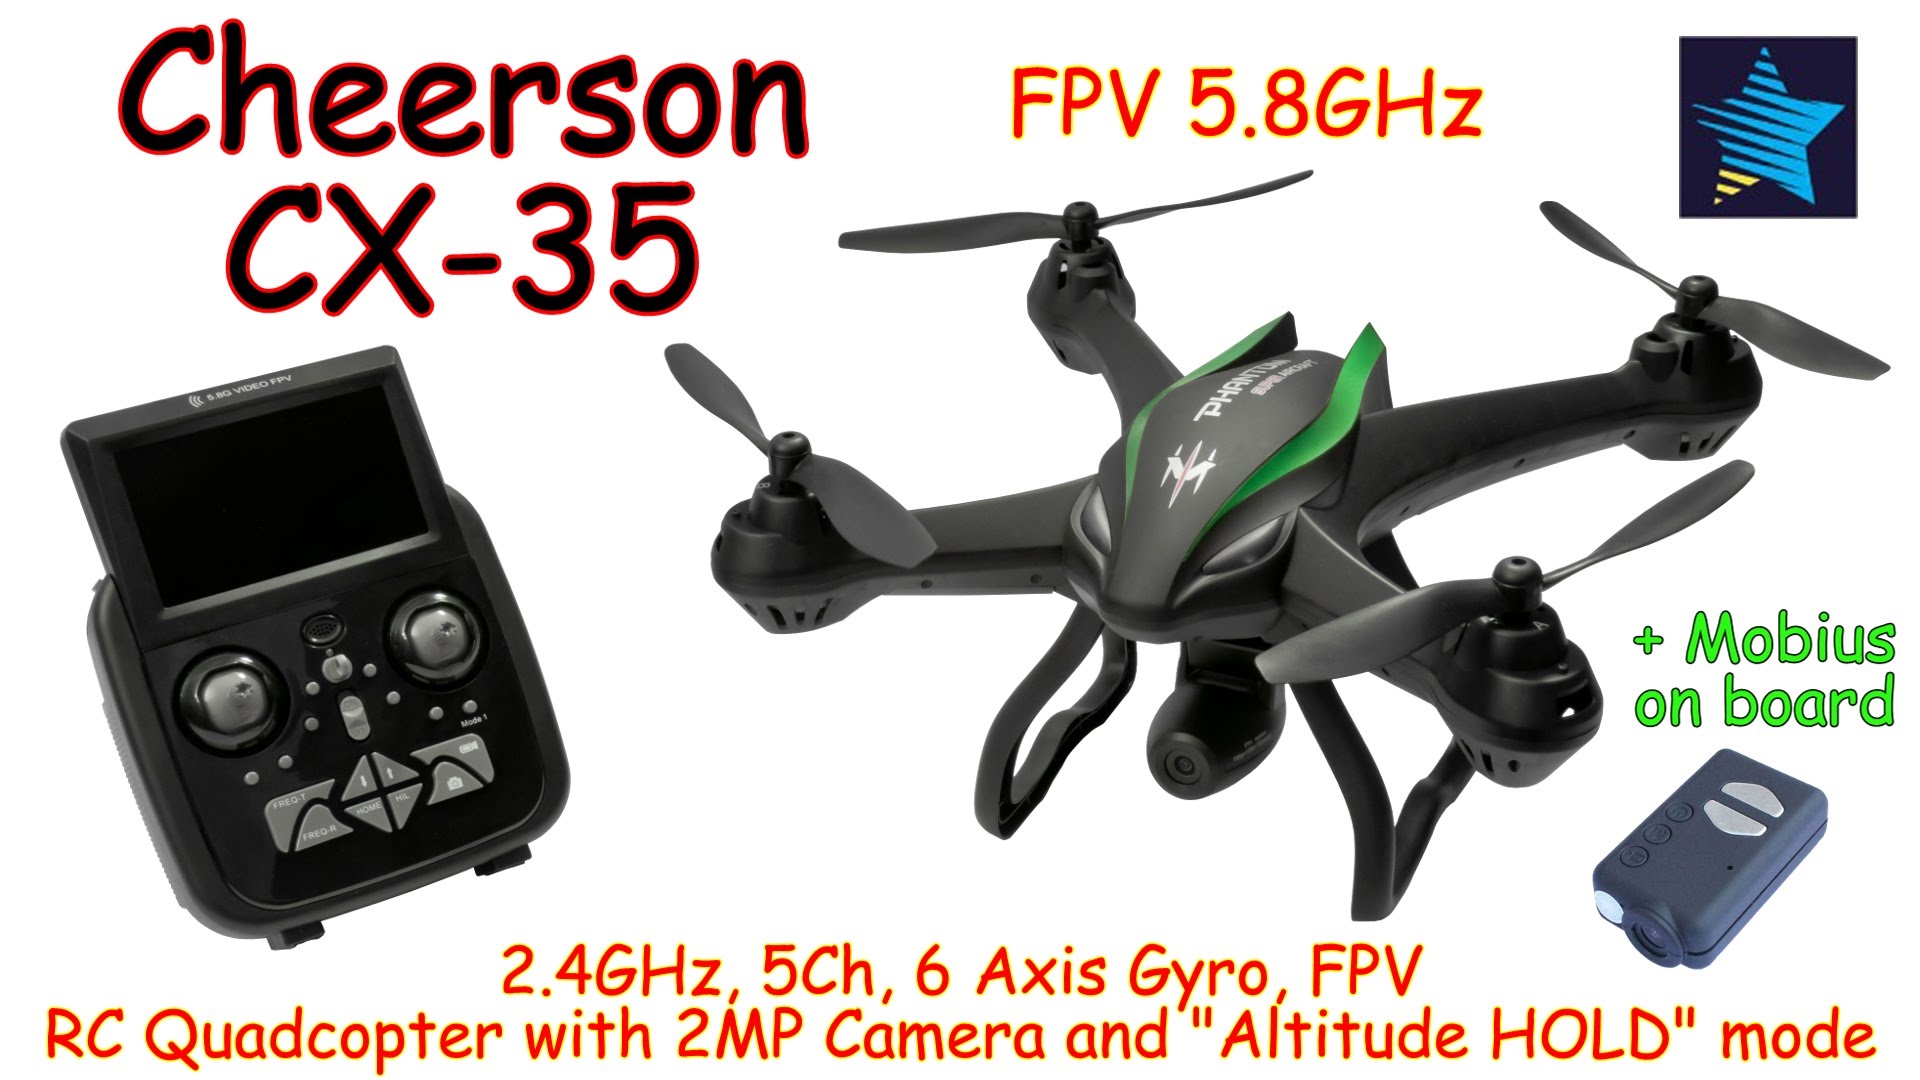 Cheerson CX-35 2.4GHz, 5Ch, 6 Axis, FPV 5.8GHz RC Quadcopter with 2MP Camera and Altitude HOLD (RTF)